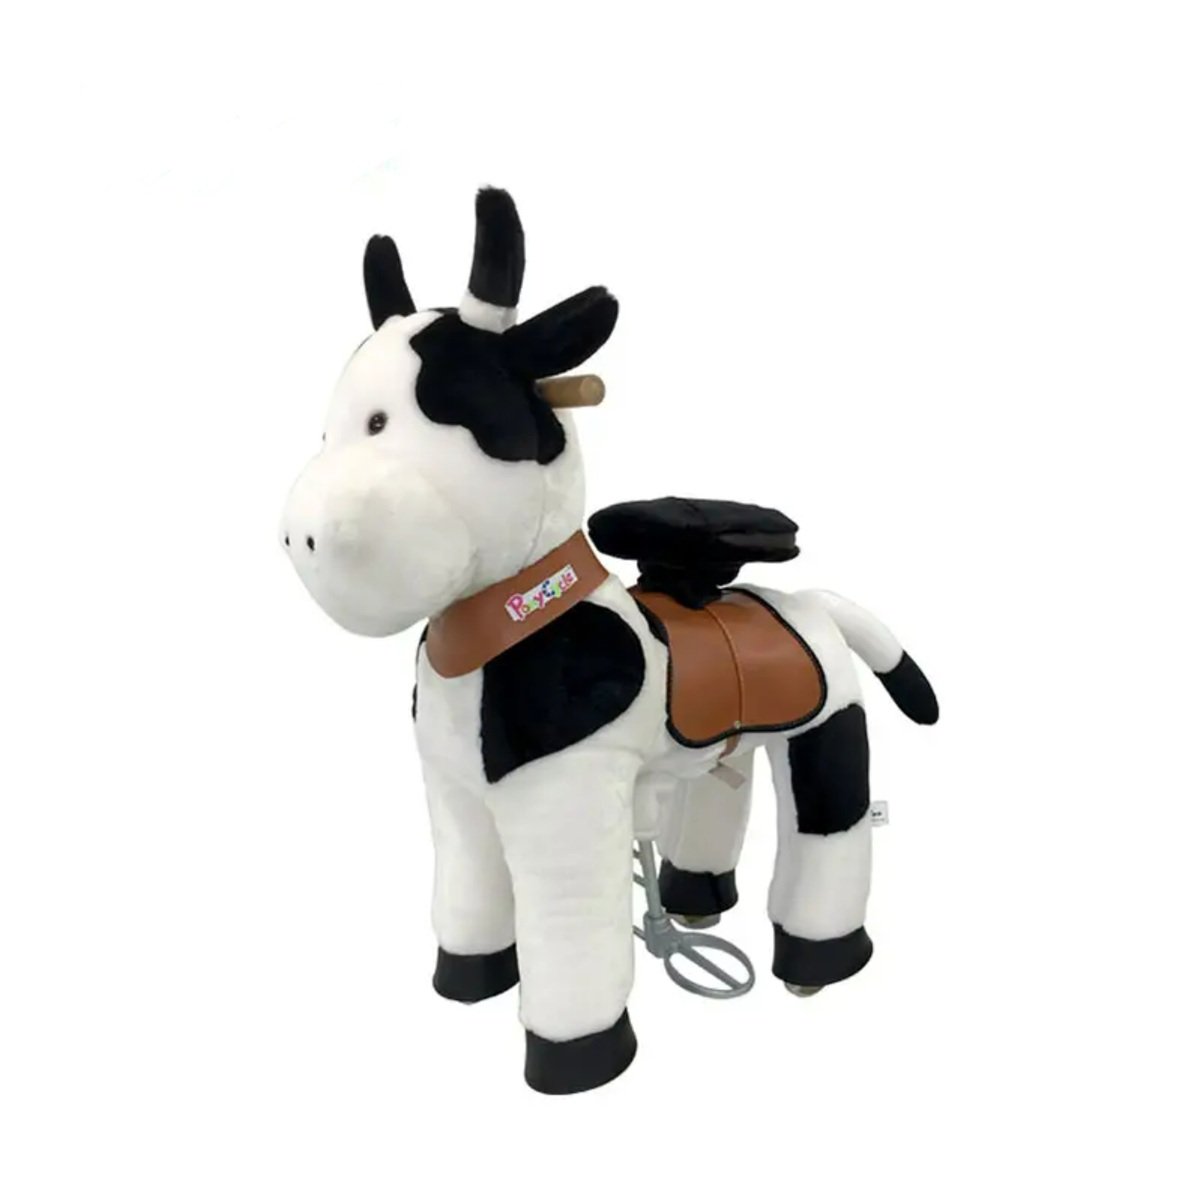 Toby's Ponycycle Riding Cow, Black and White, TB-2032